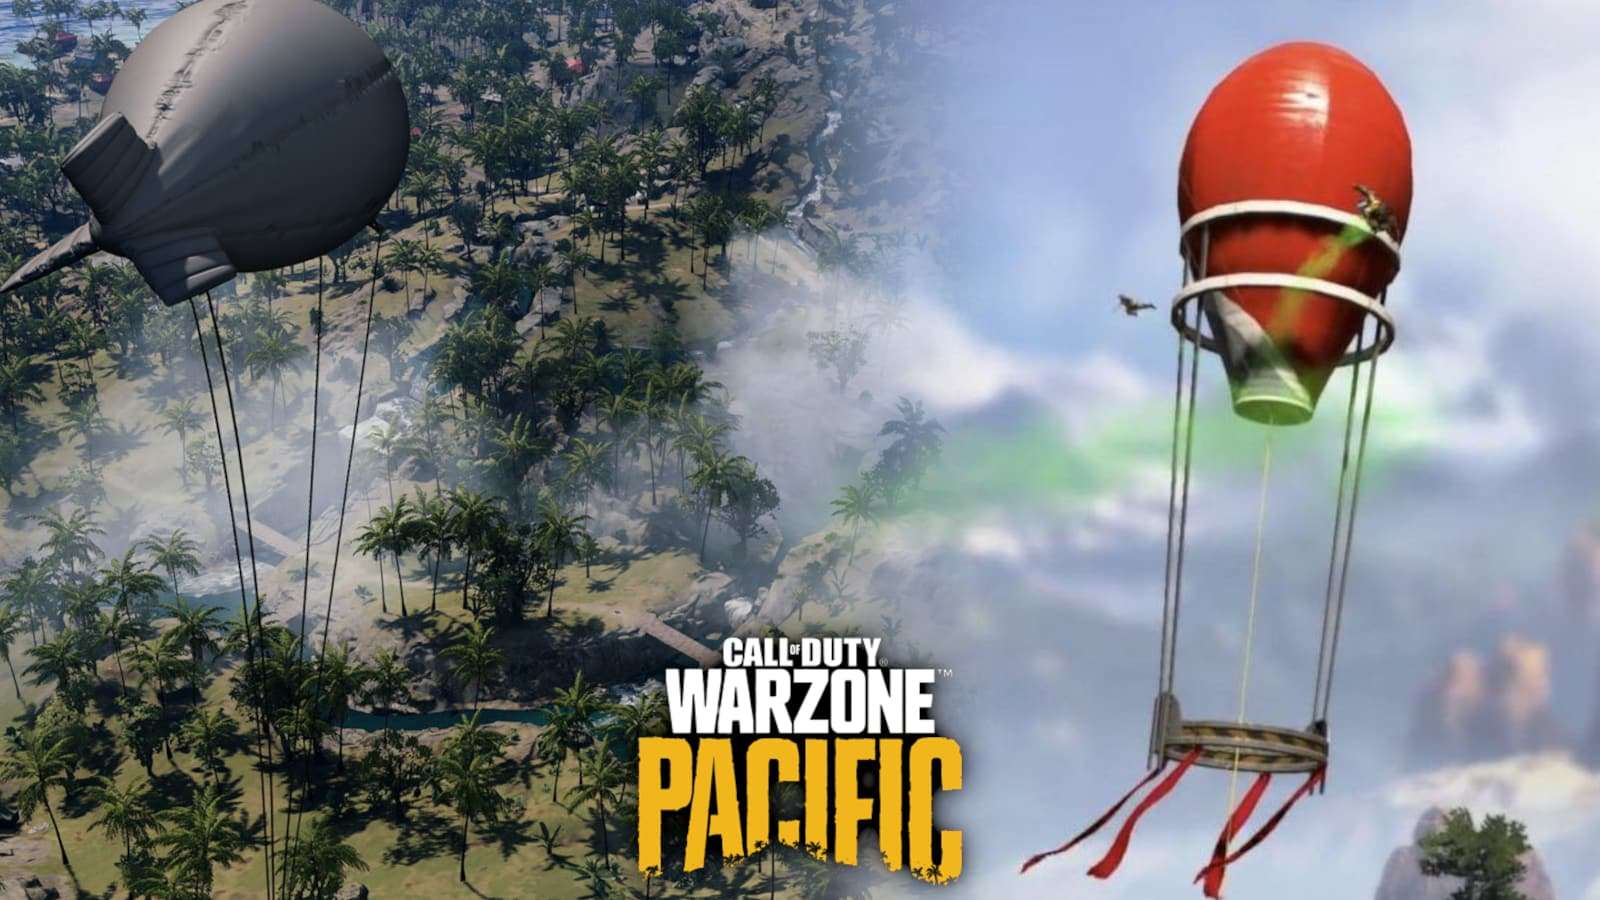 call of duty warzone pacific redeploy balloons apex legends jump tower